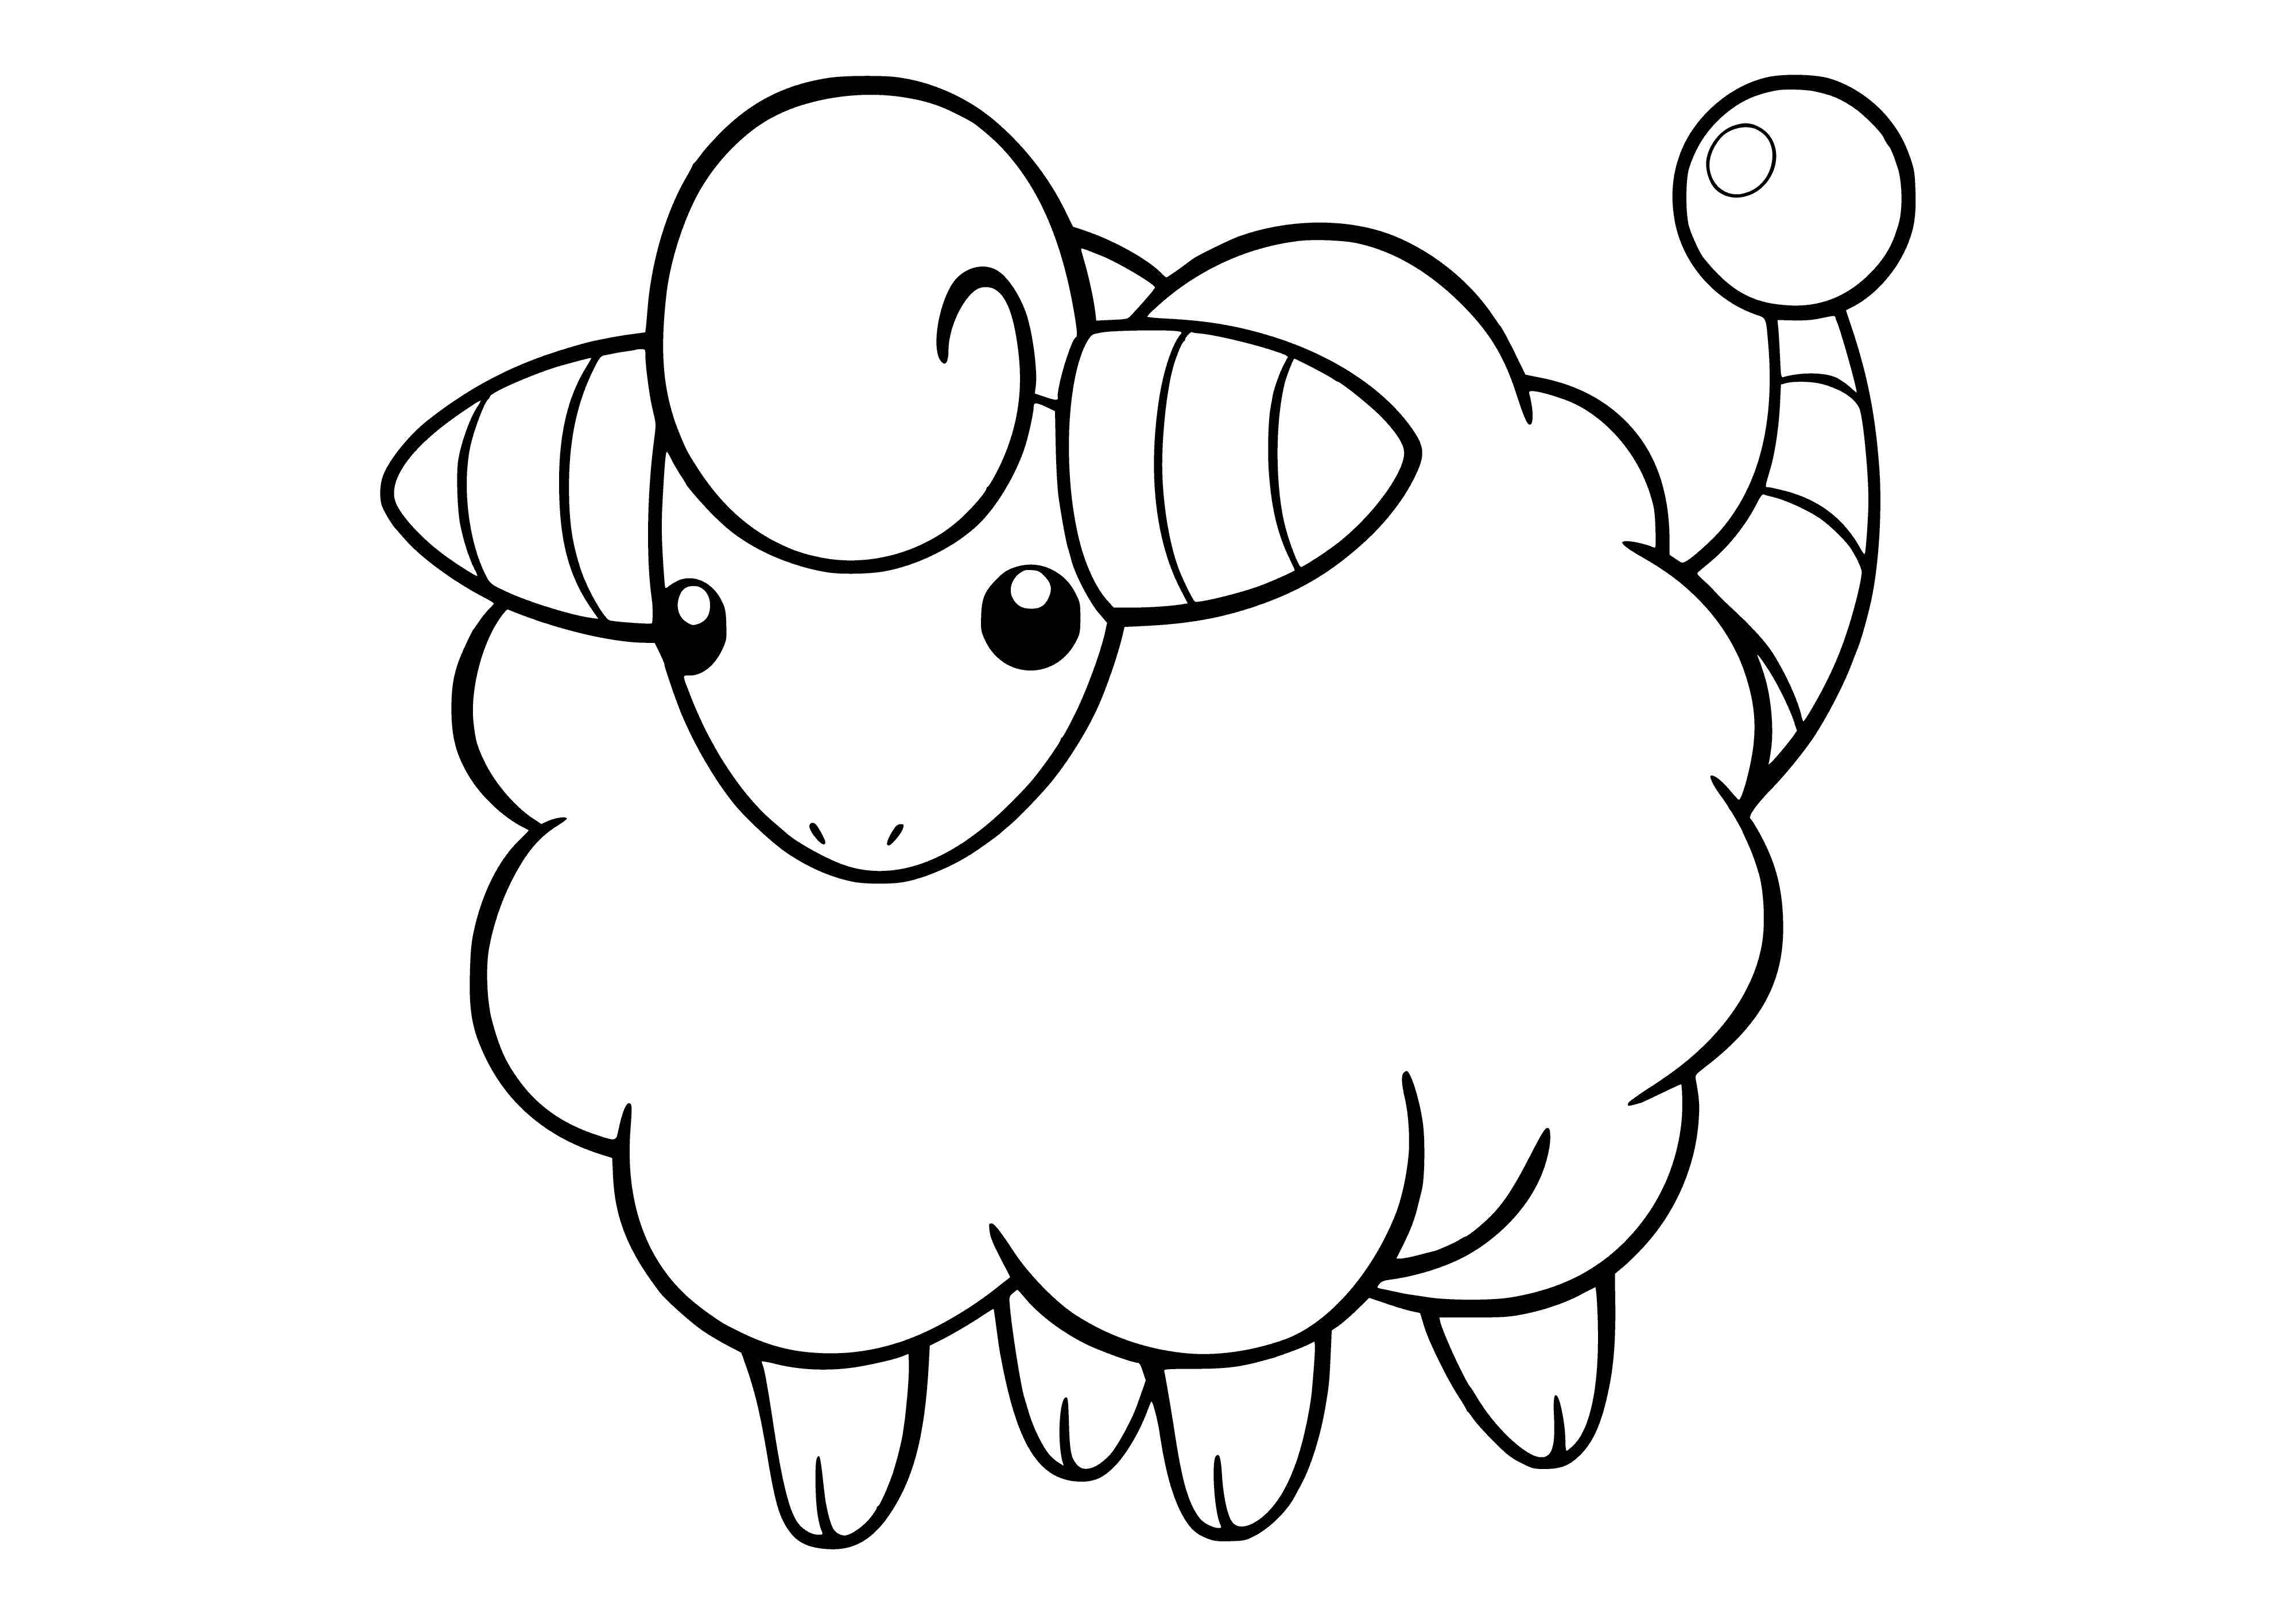 coloring page: Mareep is a fluffy yellow Pokemon with a big red crystal and powers itself and others with electricity.